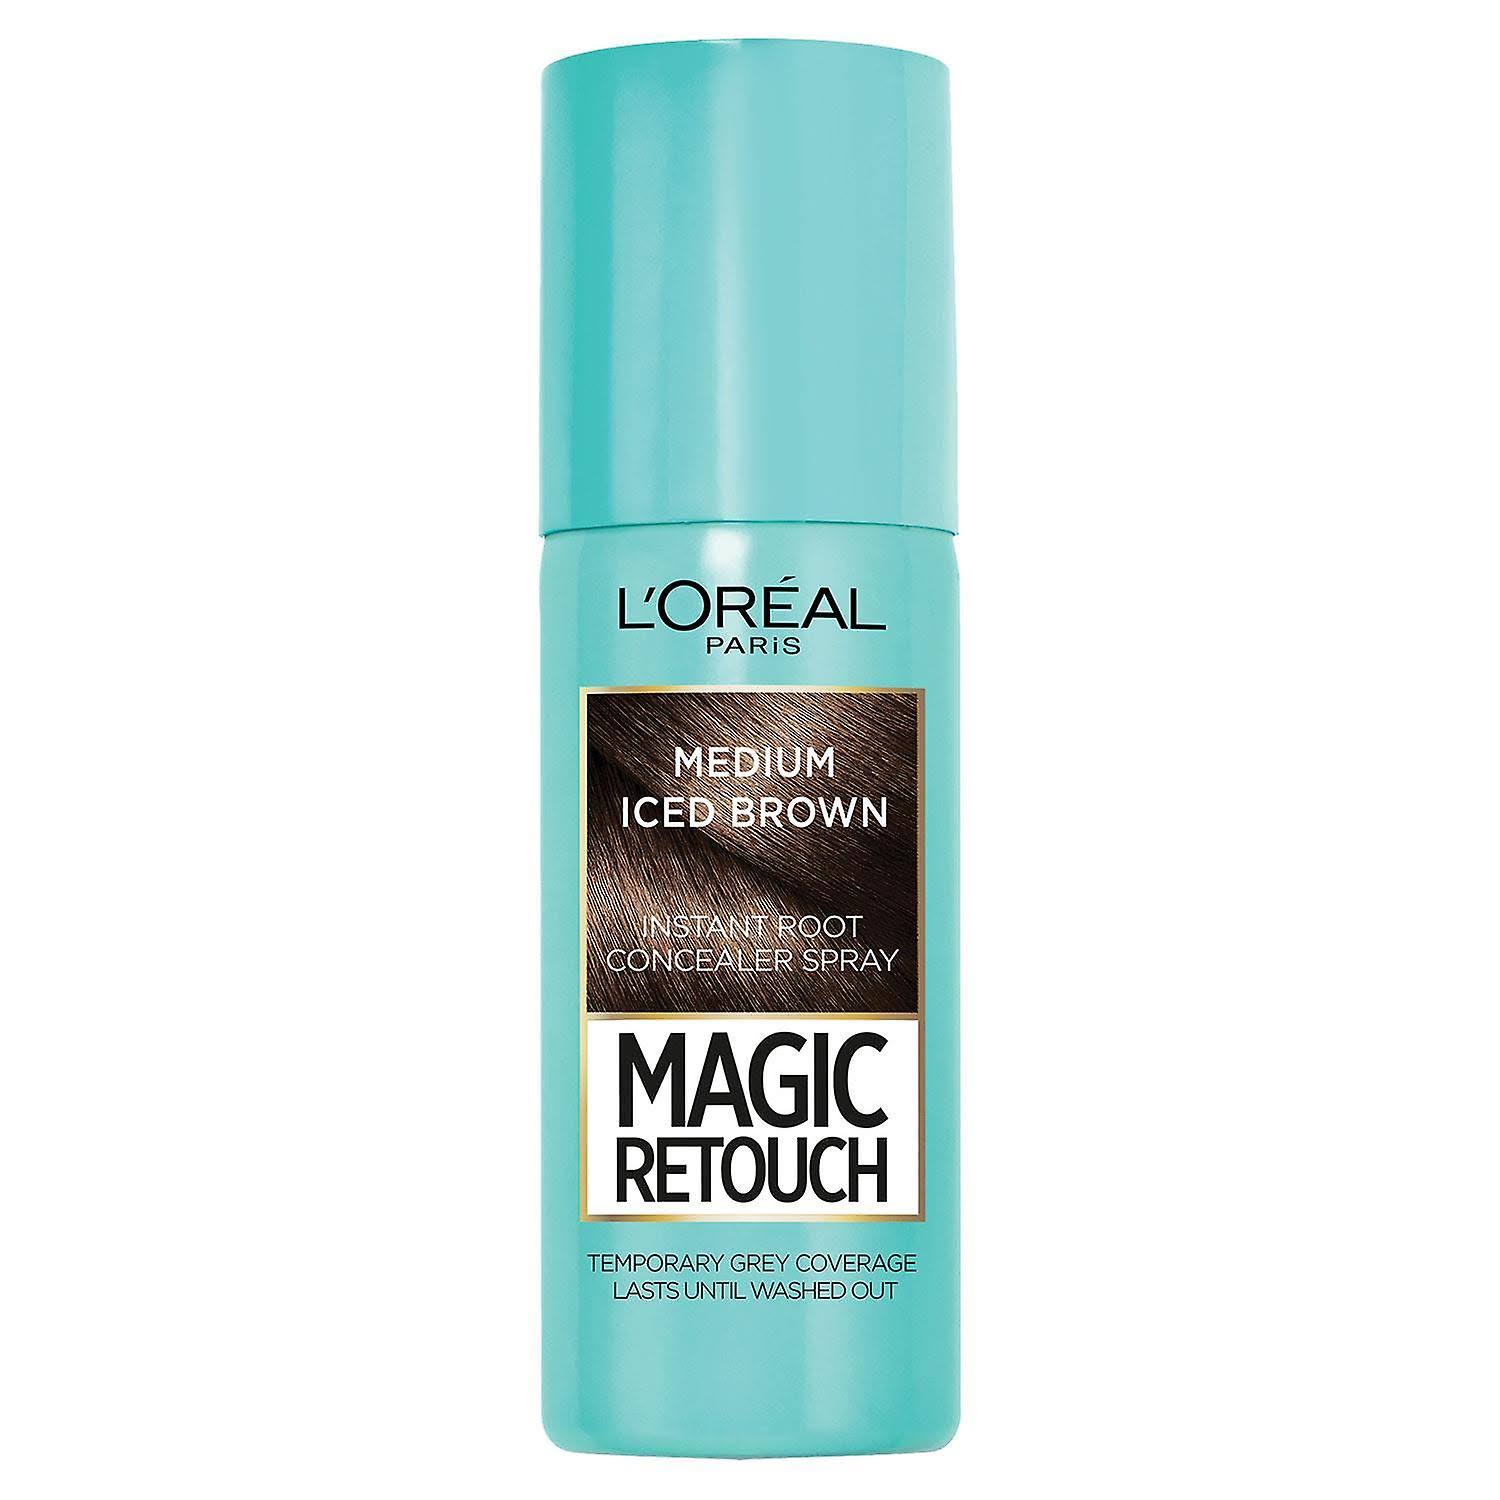 L'Oreal Magic Retouch Temporary Instant Grey Root Concealer Spray - Medium Iced Brown, 75ml